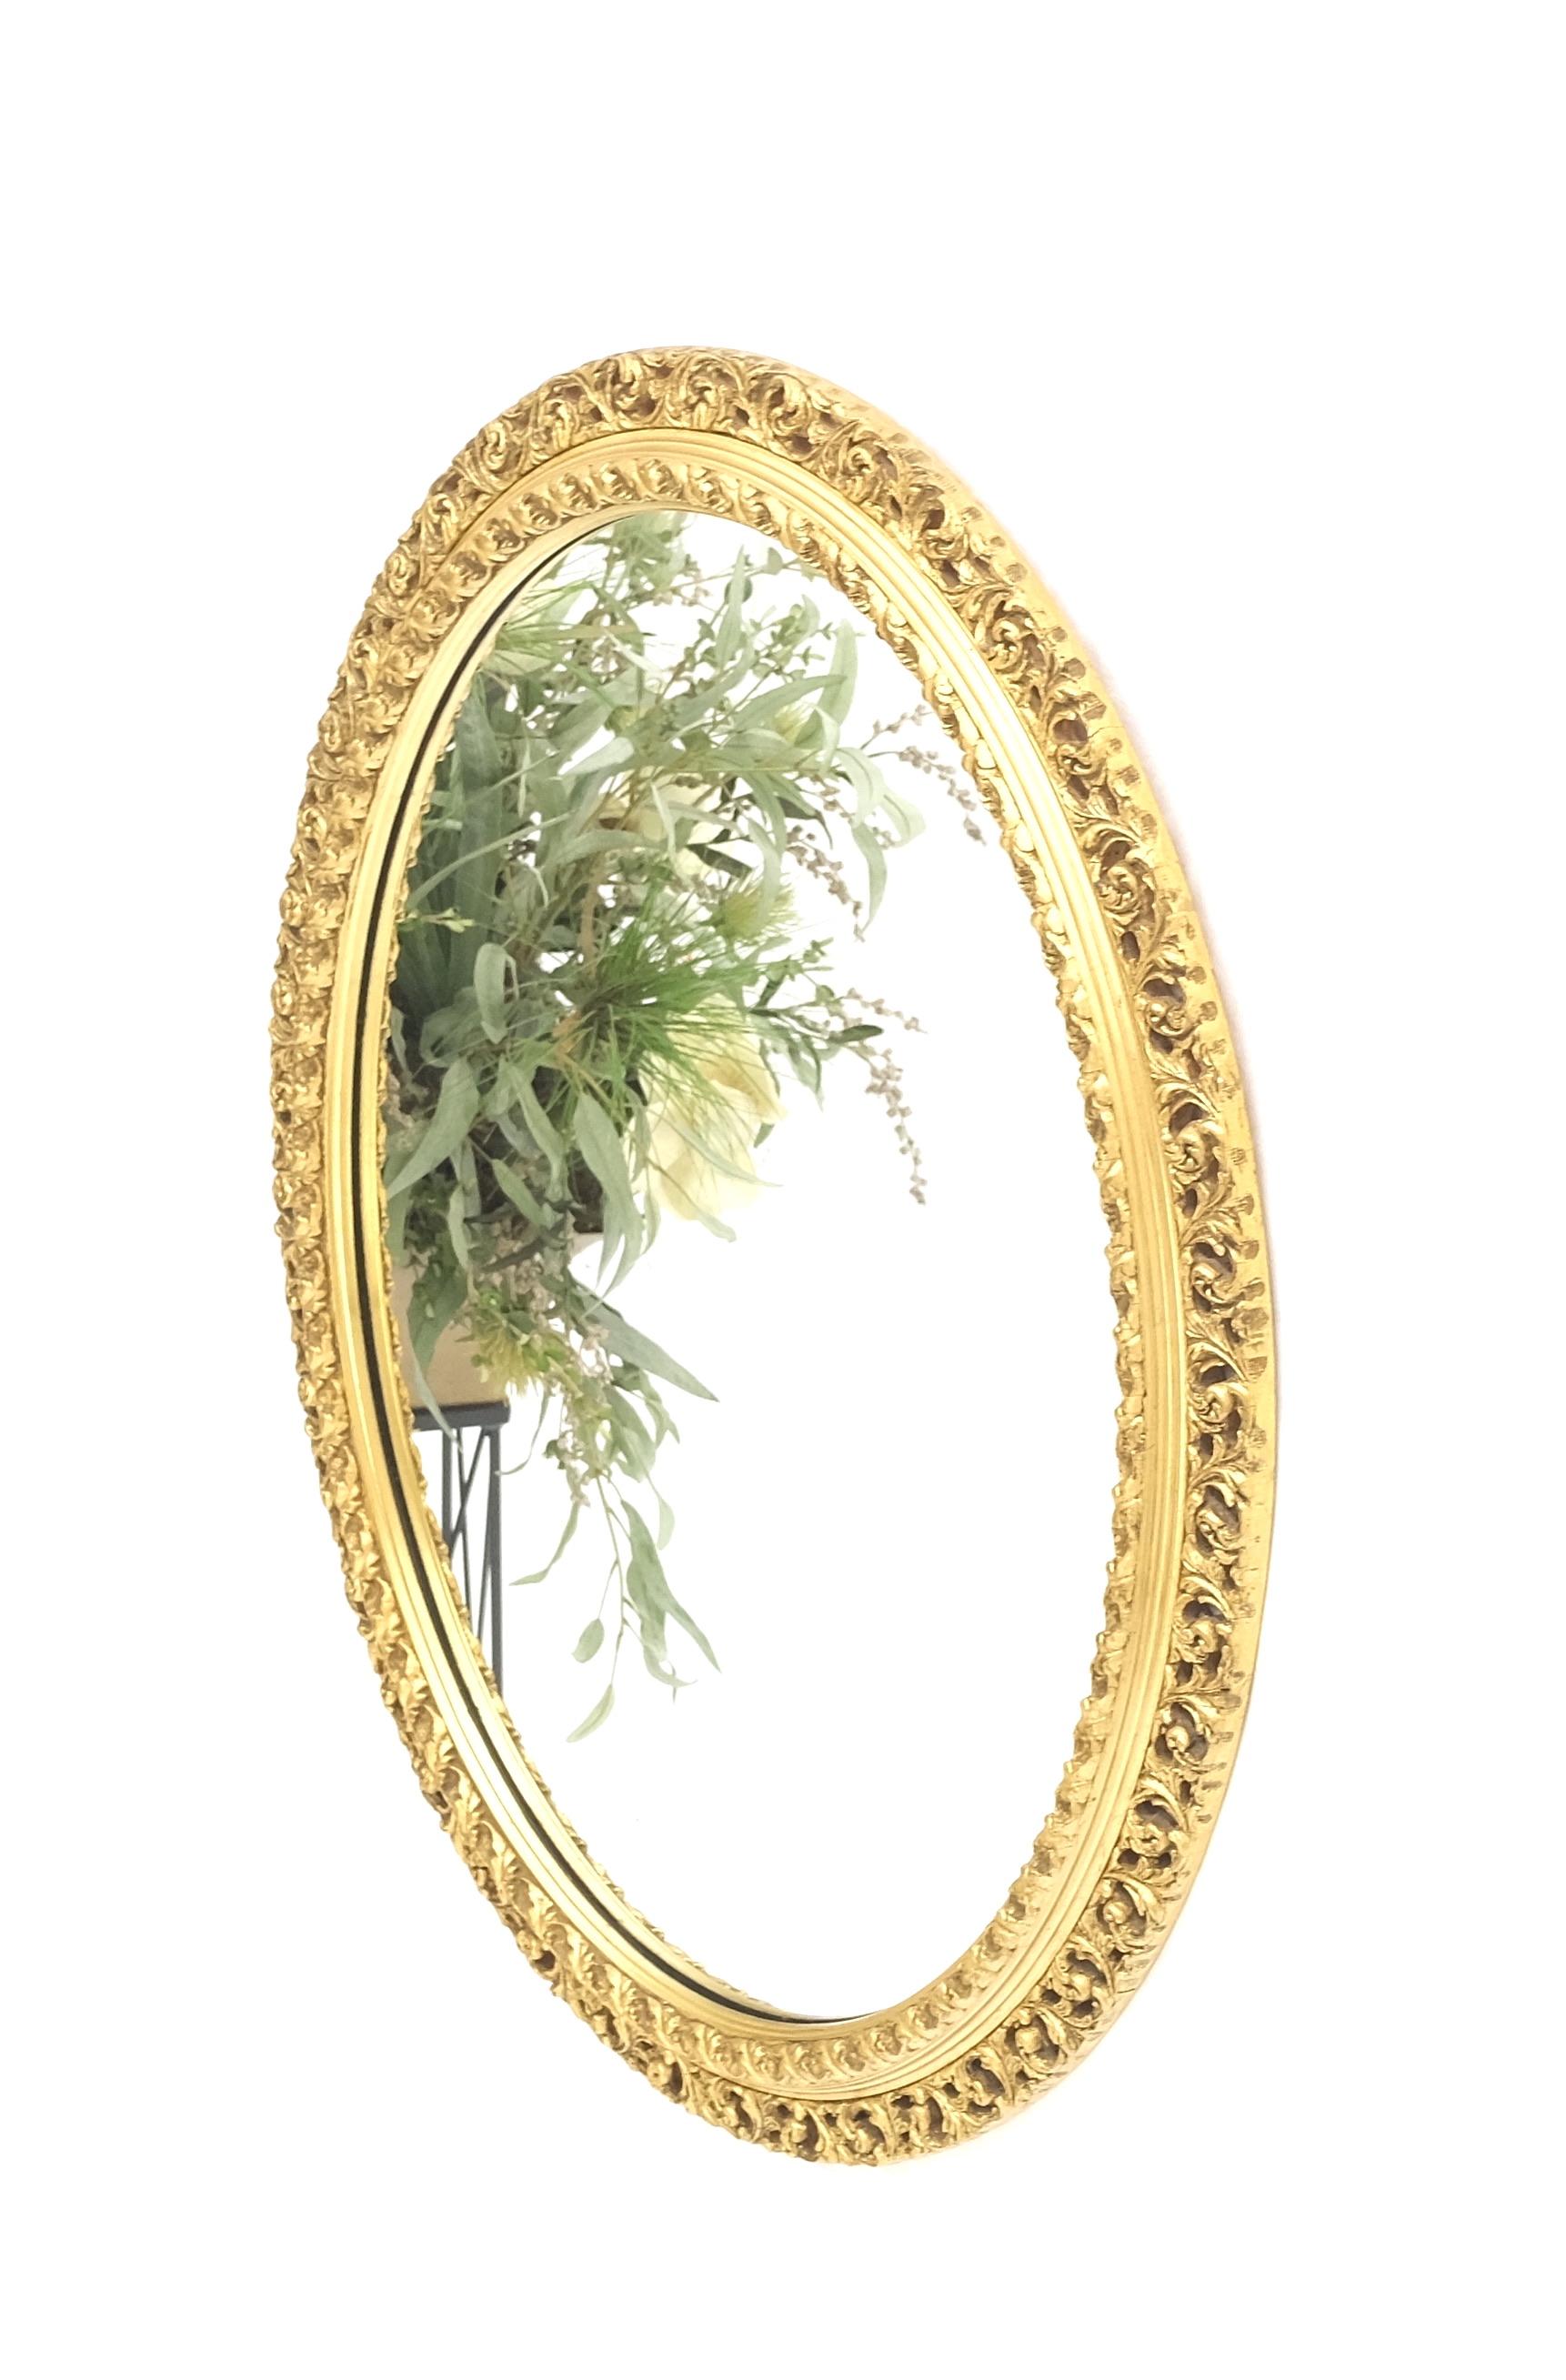 Oval Gesso & carved wood gold gilt frame wall mirror MINT!